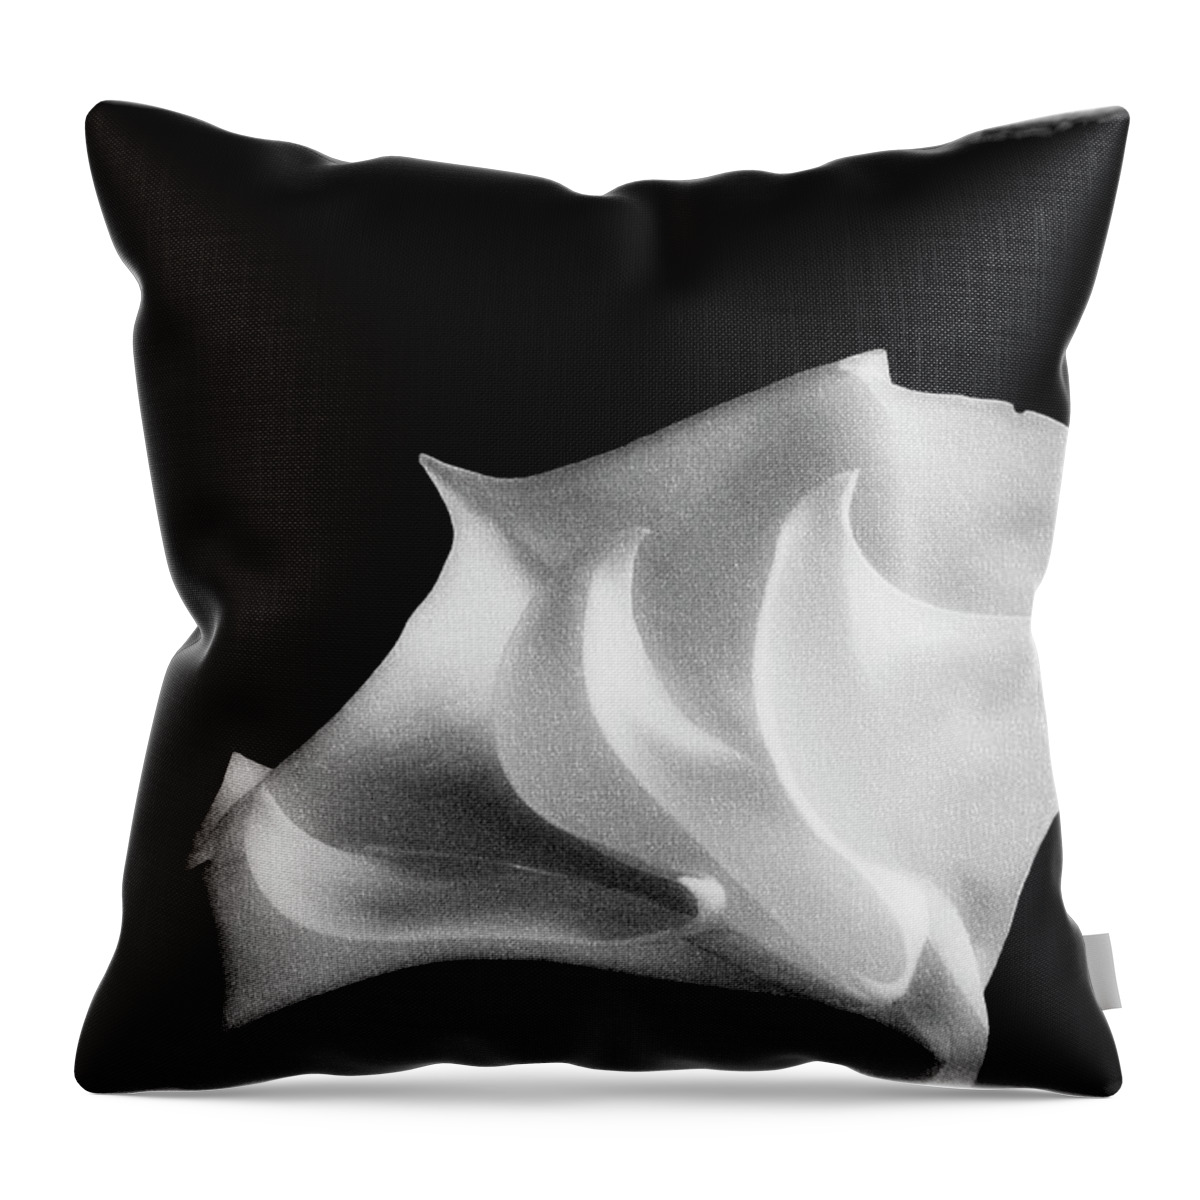  Throw Pillow featuring the photograph That Wet And Unholy Heat by Cynthia Dickinson